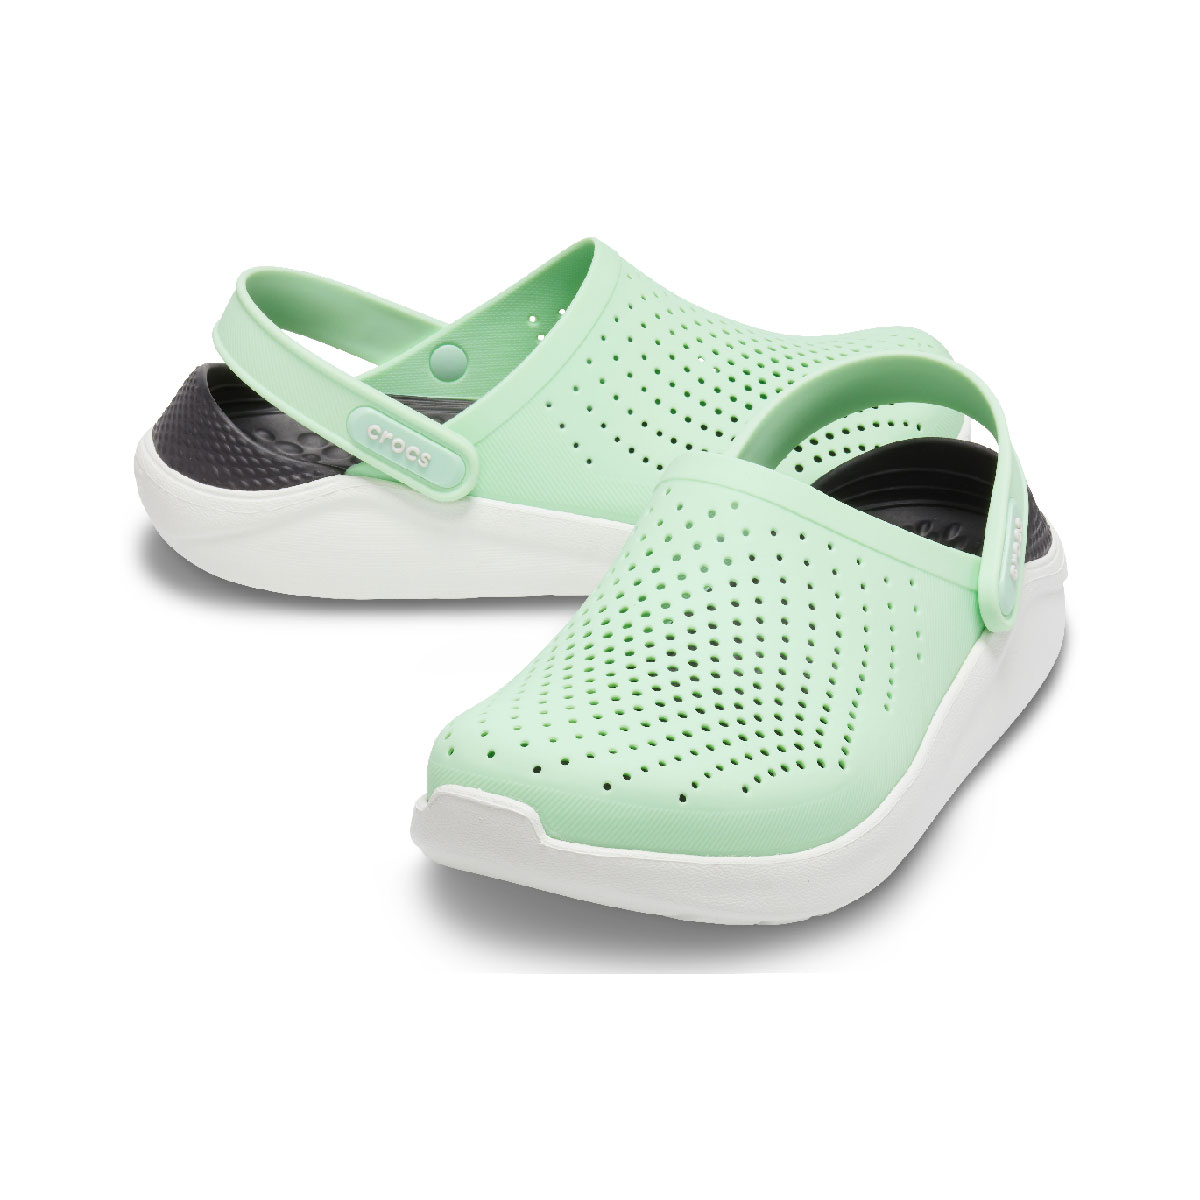 LiteRide Clog Neo Mint/Almost White